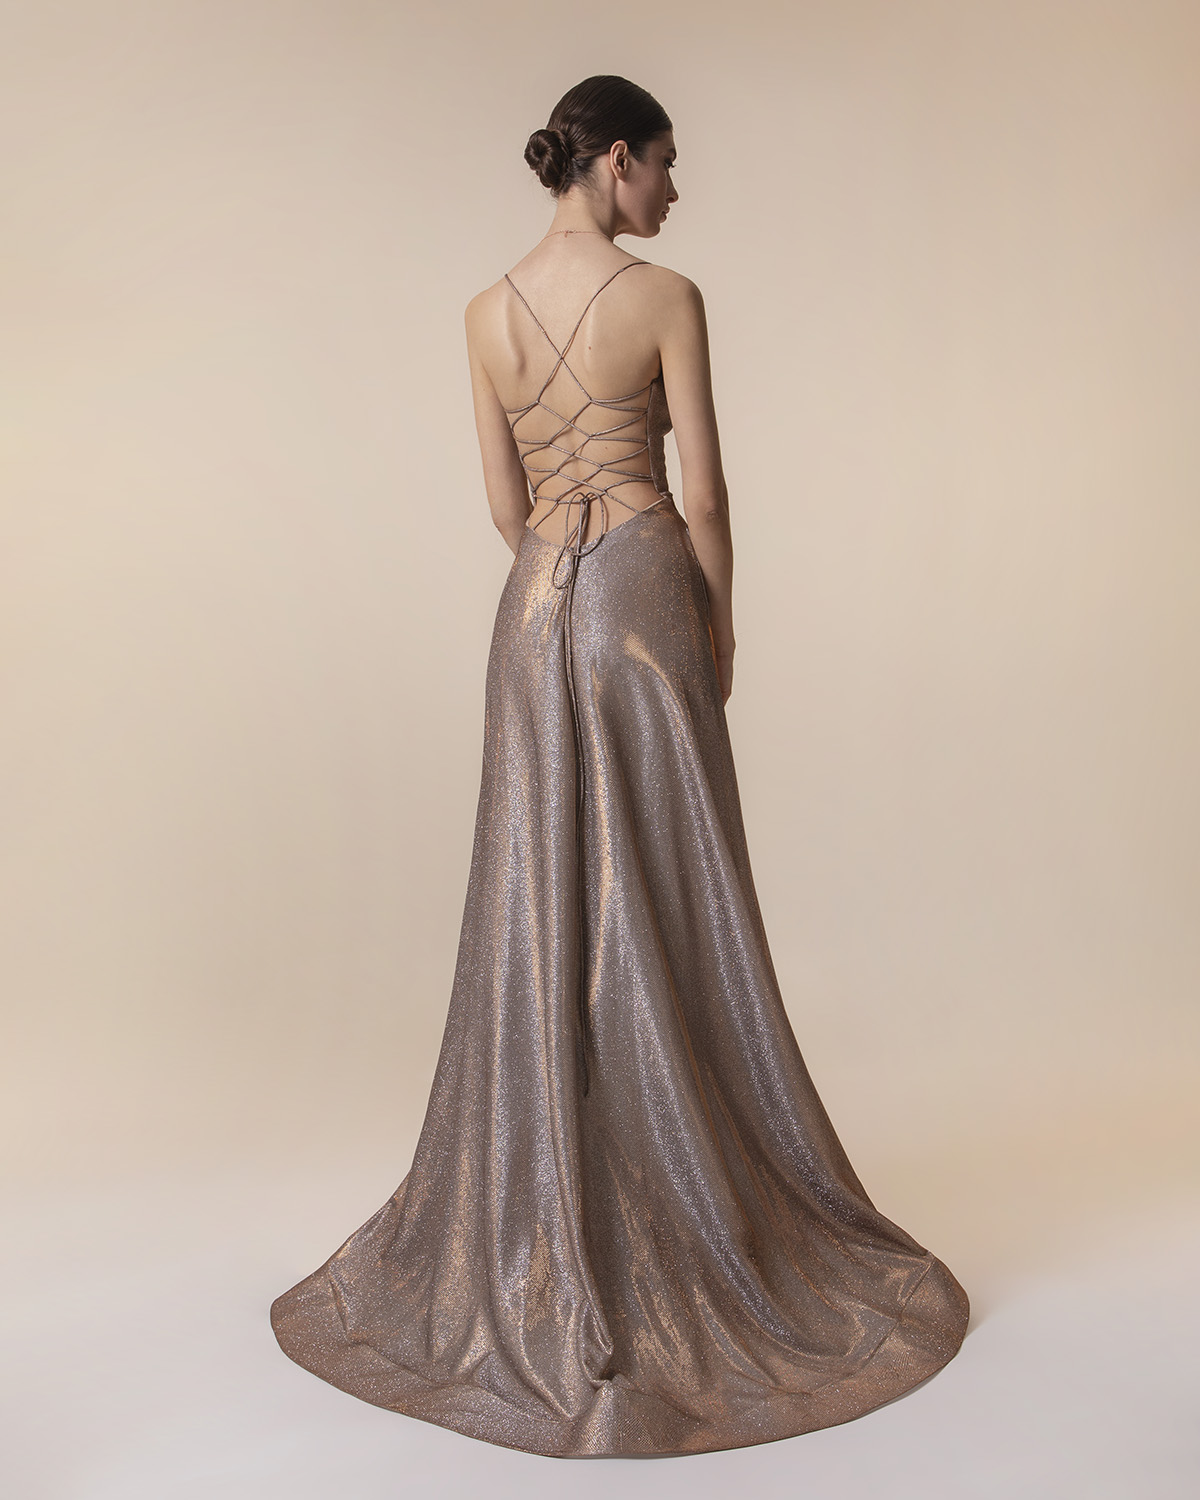 Evening Dresses / Long evening dress with shining fabric and open back